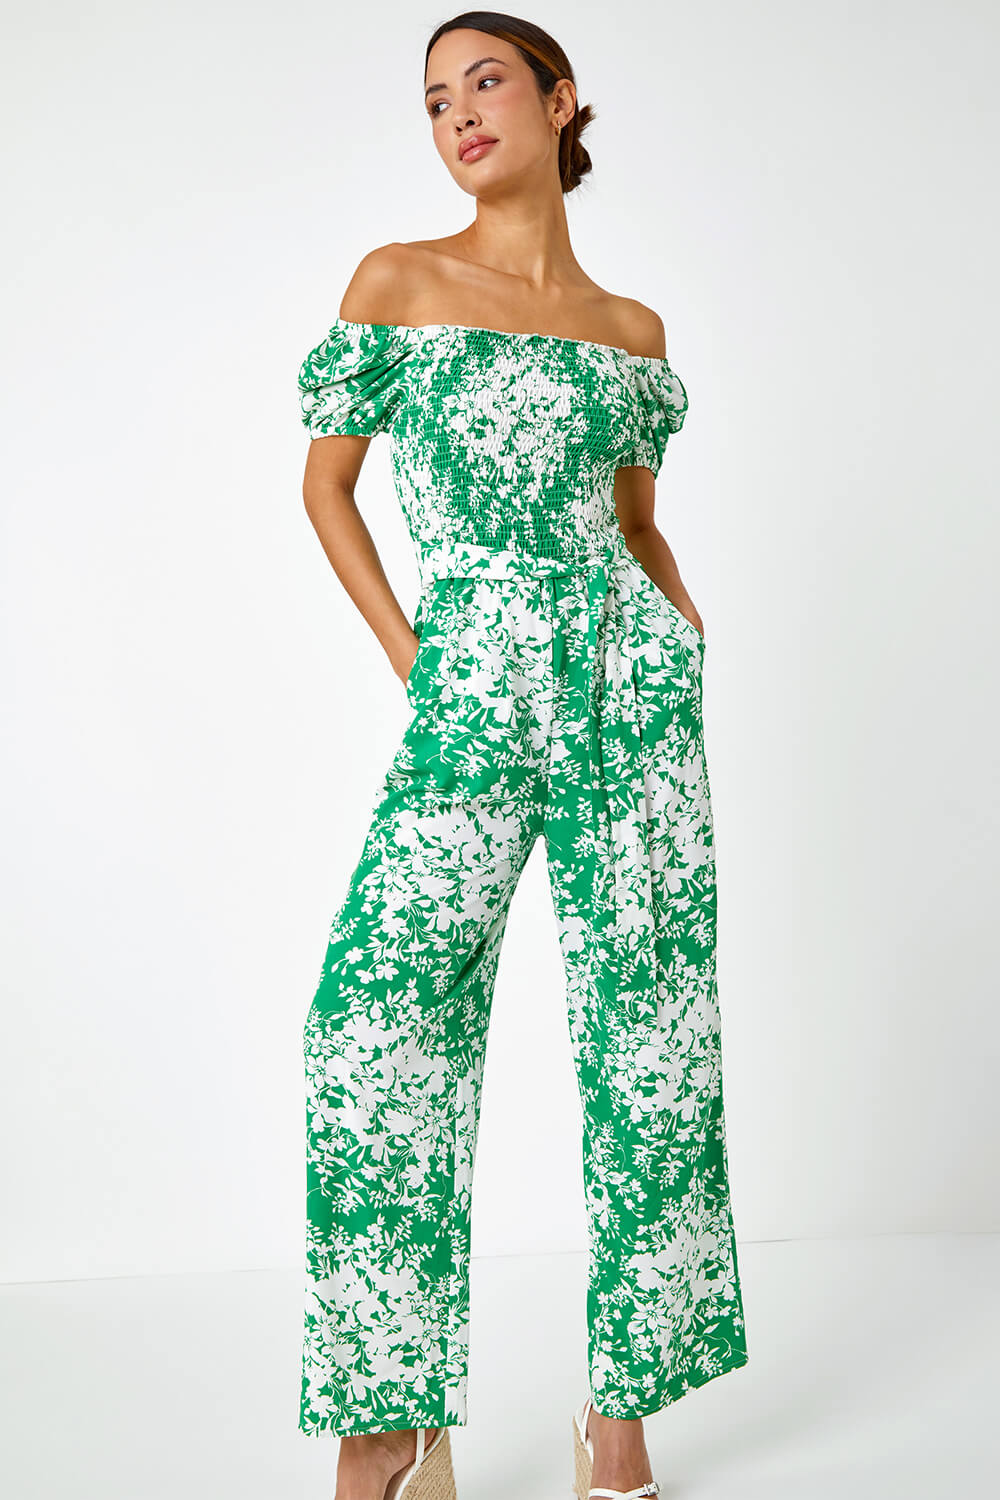 Green Ditsy Floral Stretch Shirred Jumpsuit, Image 4 of 5